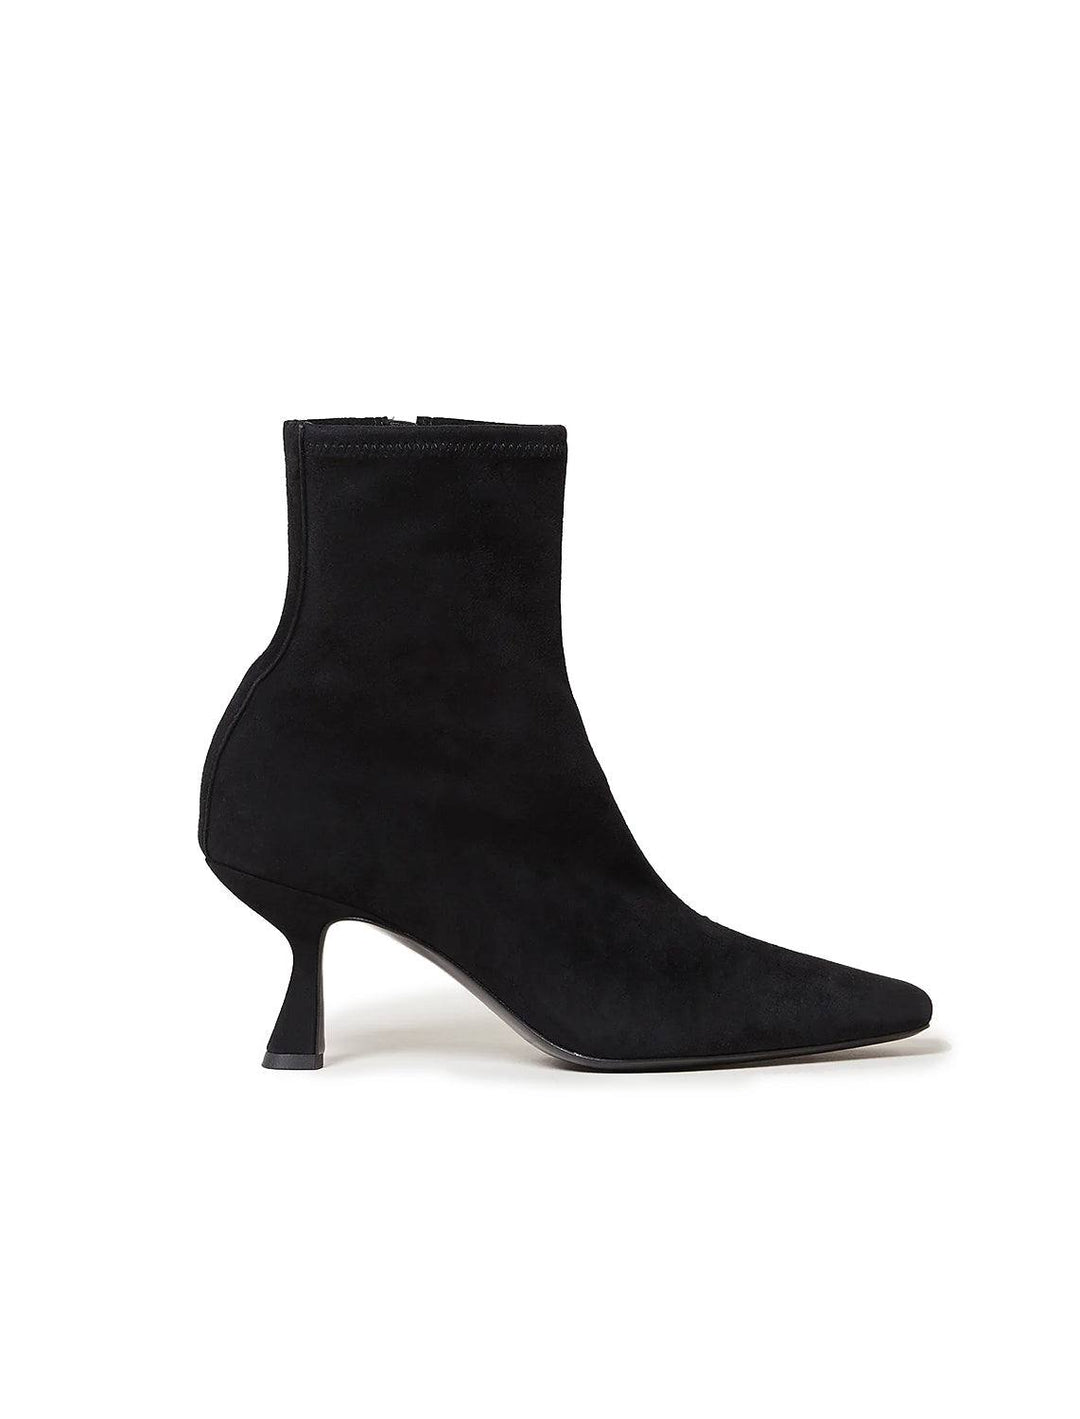 Side view of Loeffler Randall's thandy boot in black.